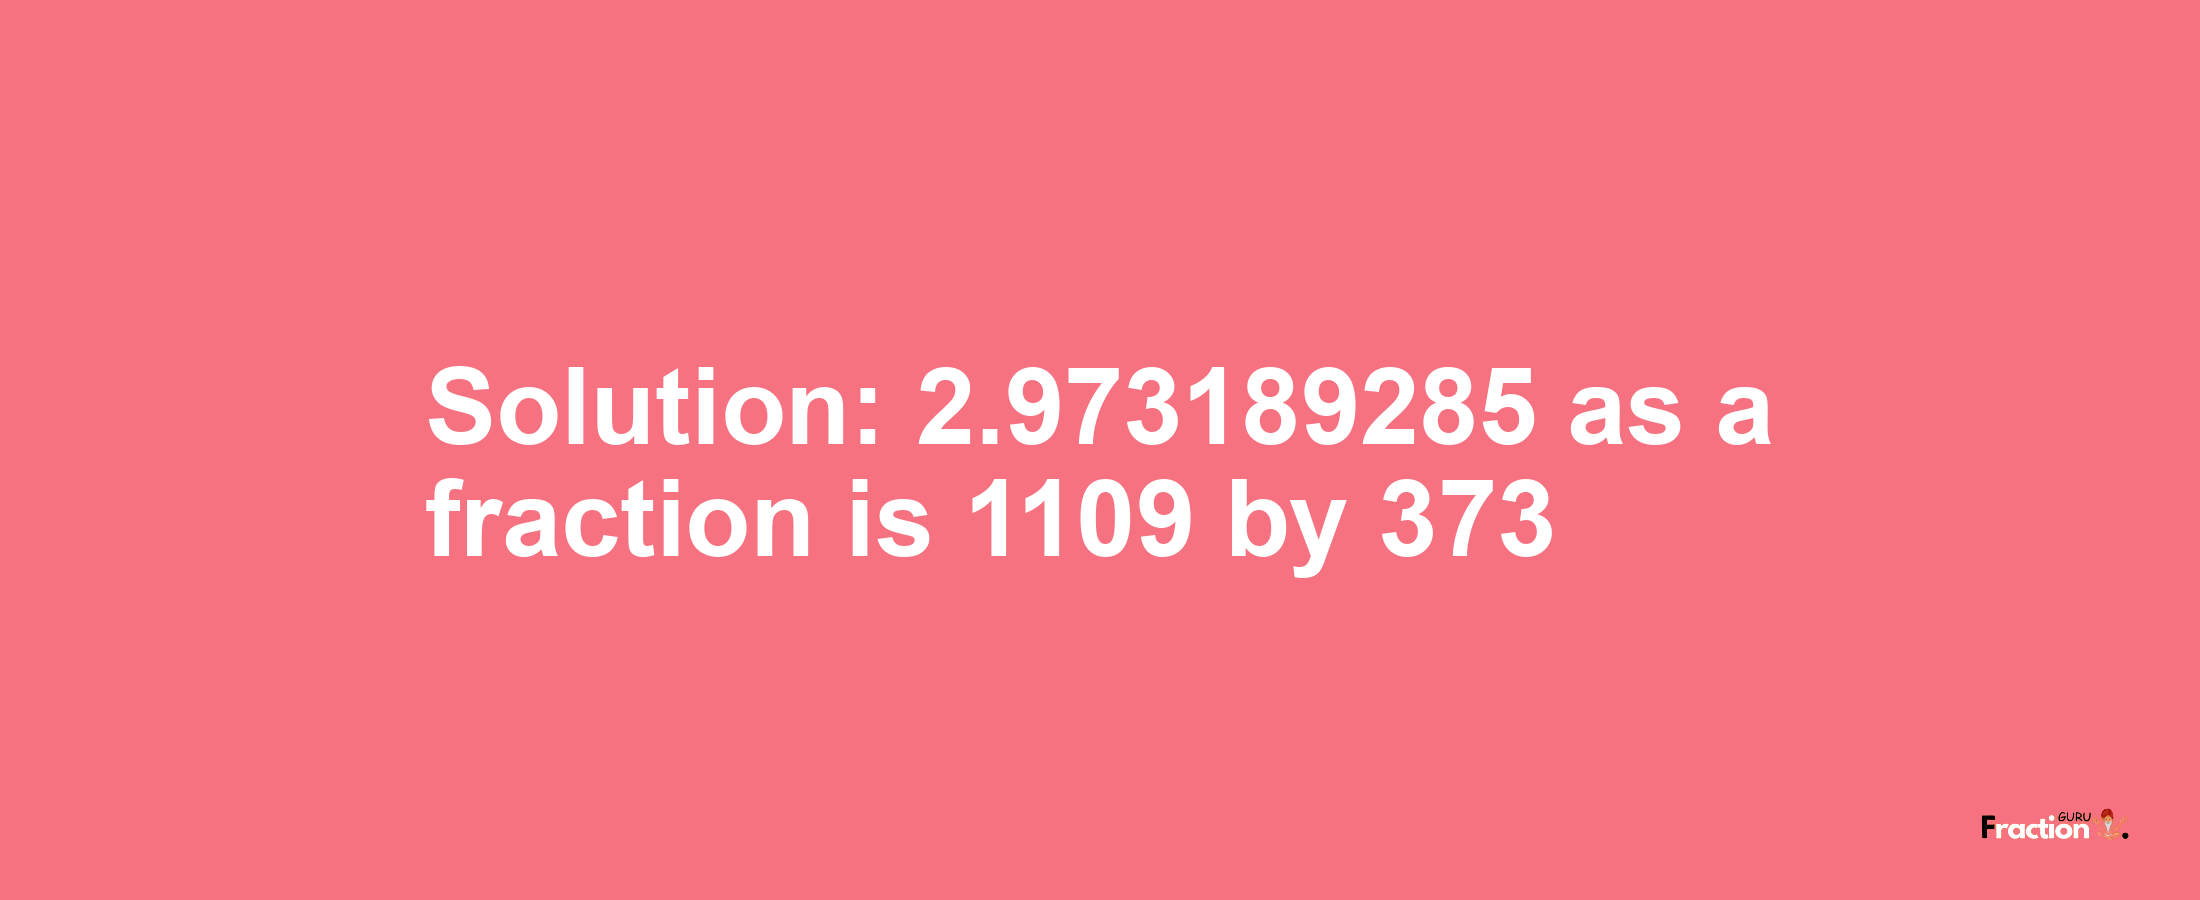 Solution:2.973189285 as a fraction is 1109/373